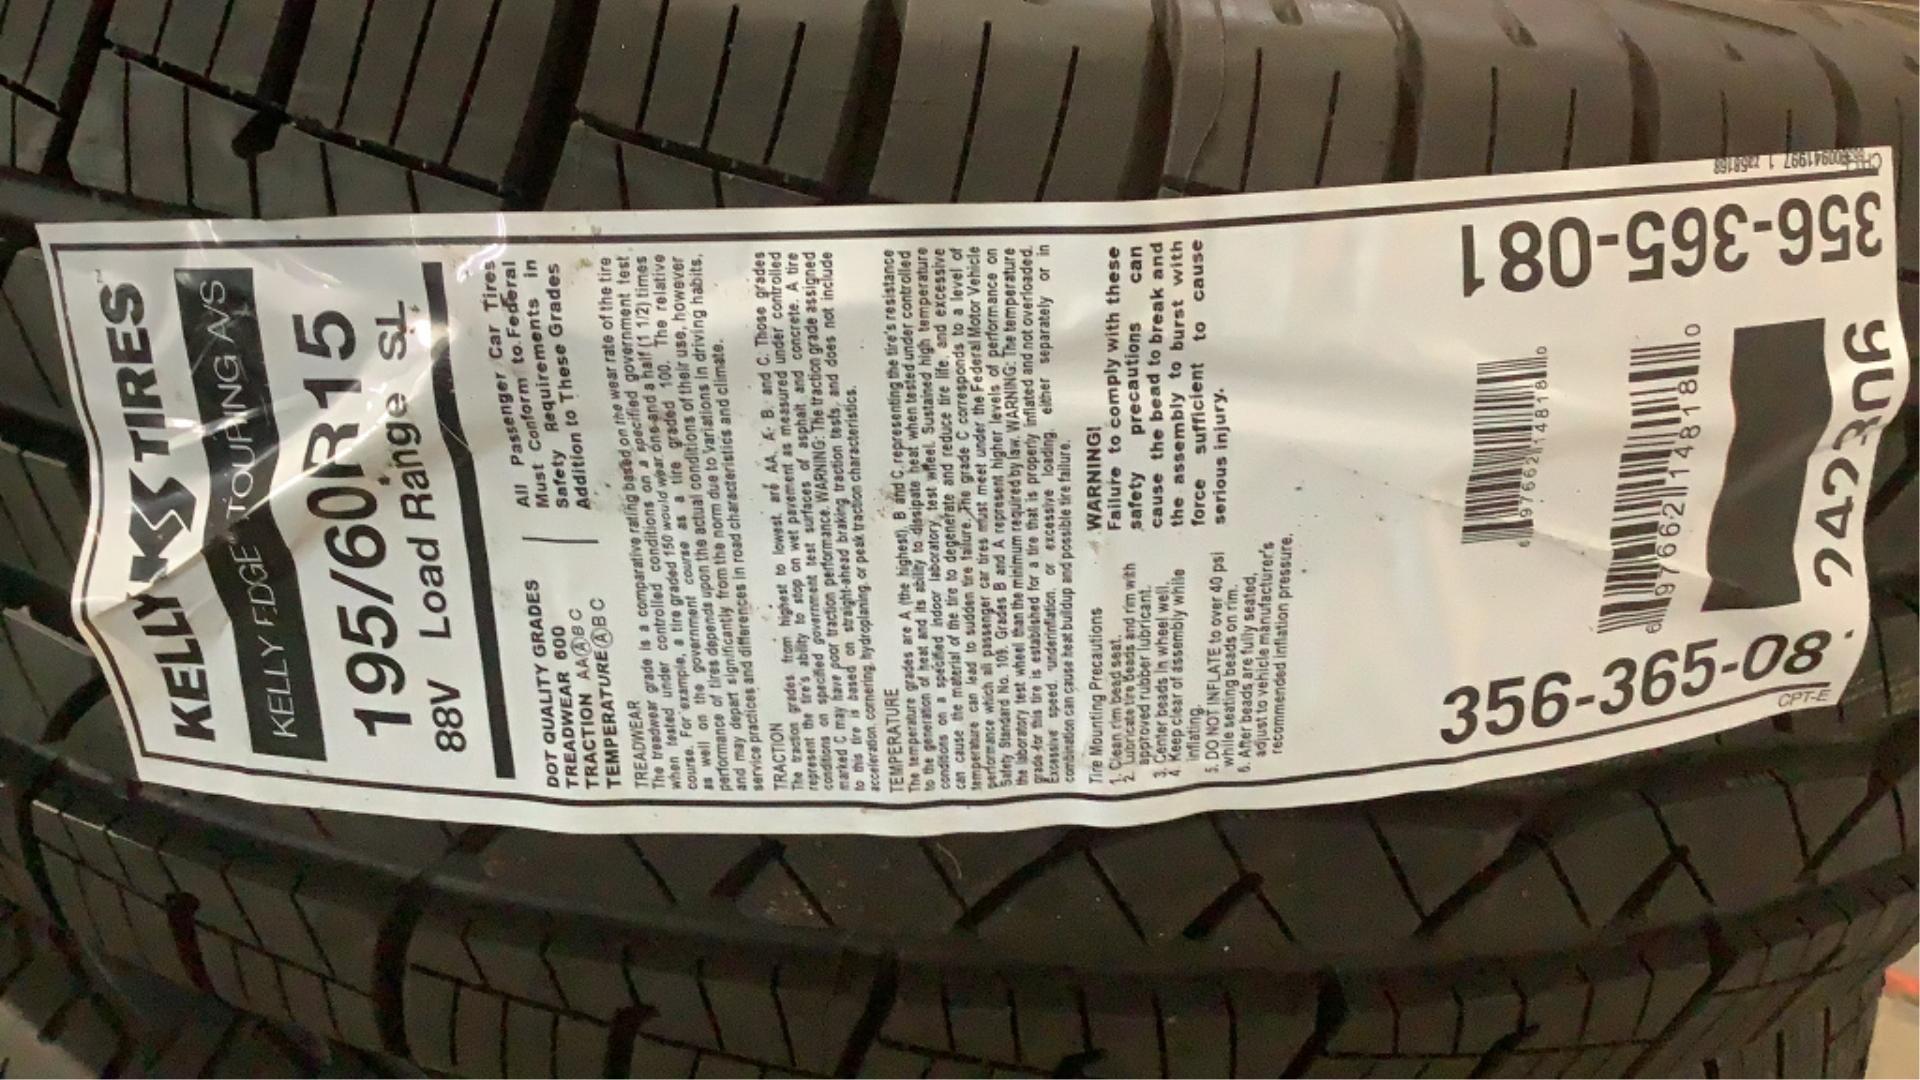 (4) Kelly 195/60R15 Tires Edge Touring A/S